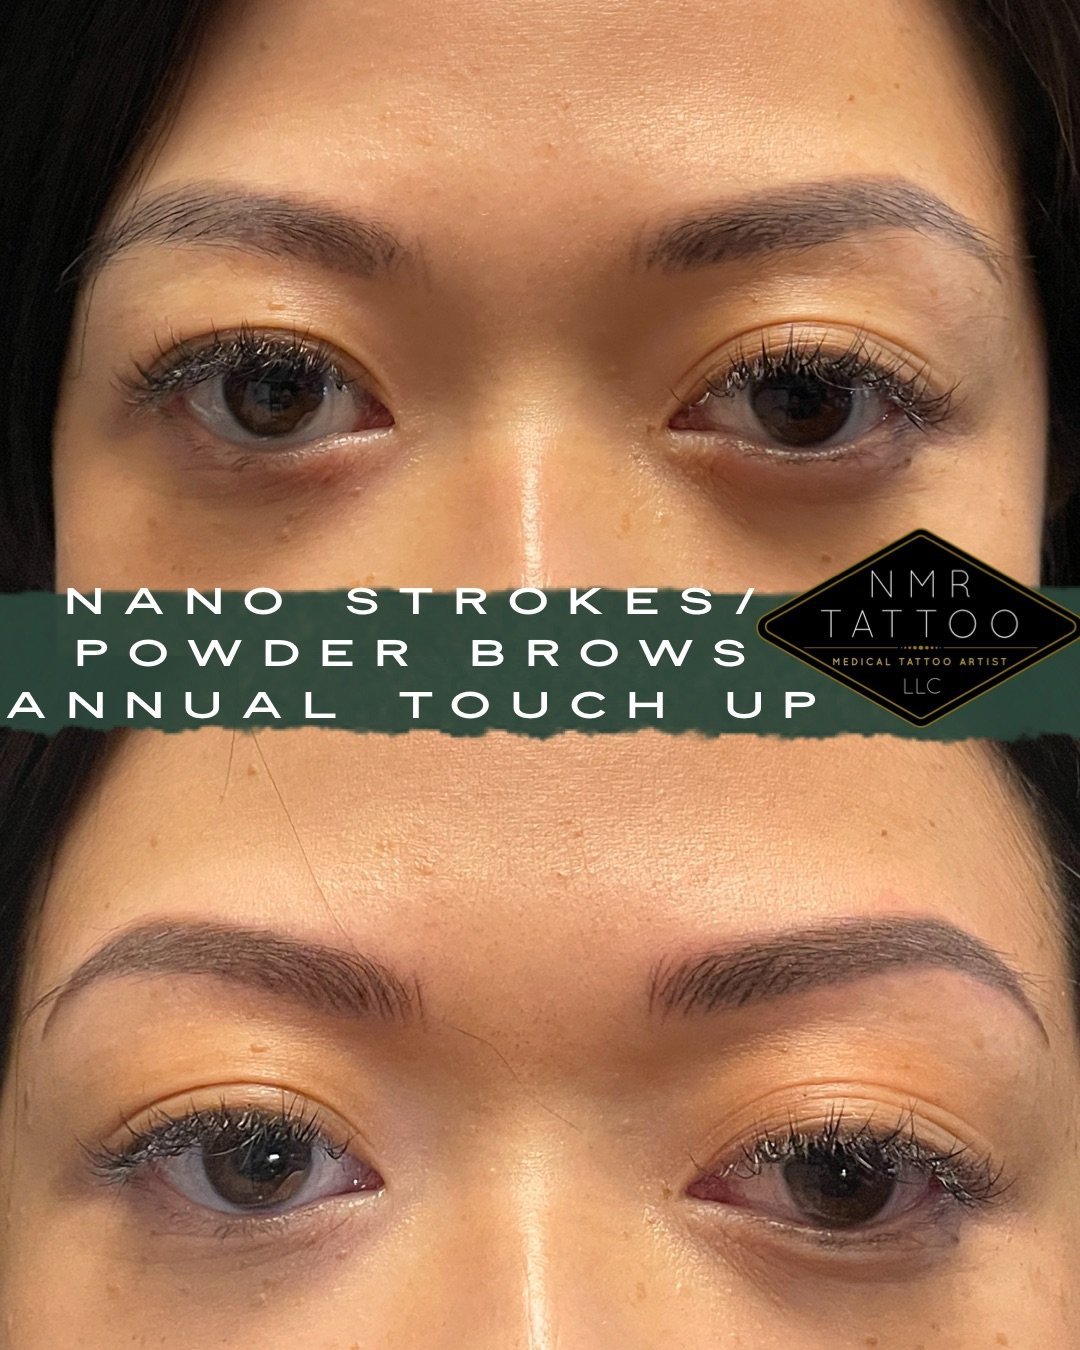 How Painful Is Microblading?